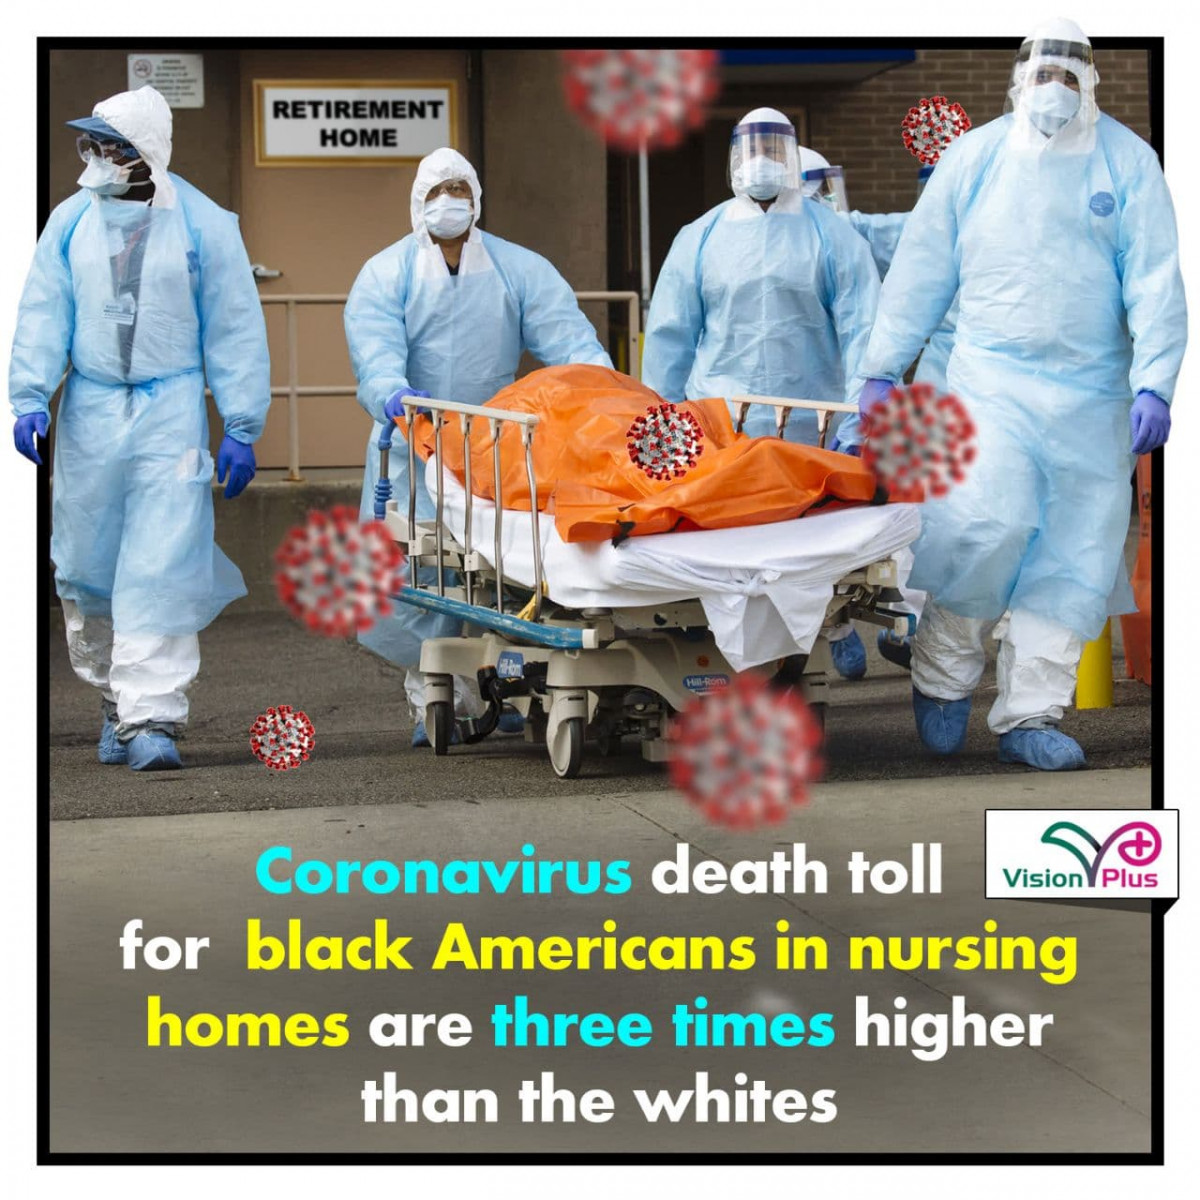 Coronavirus death toll for black Americans in nursing homes are three times higher than the whites